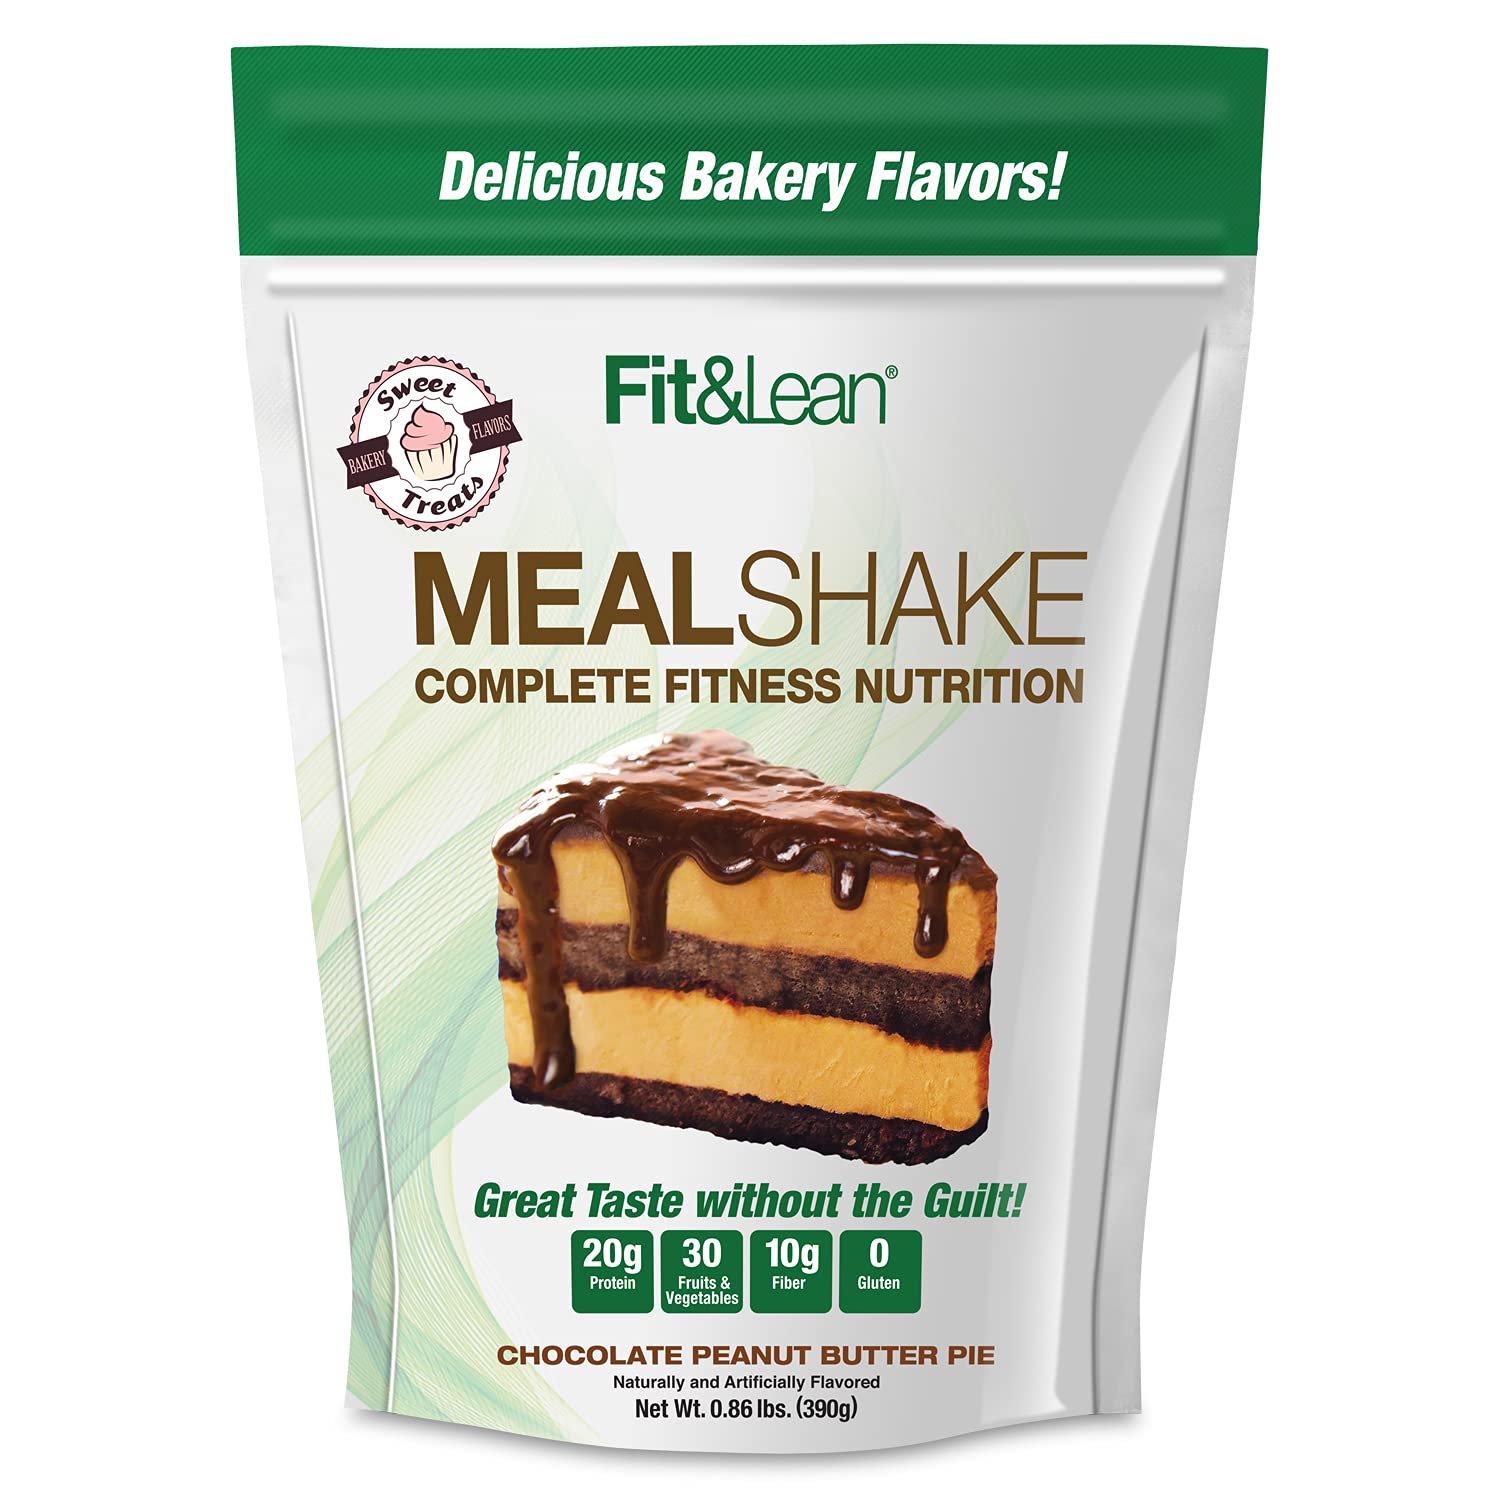 Fit & Lean Meal Shake Meal Replacement with Protein, Fiber, Probiotics